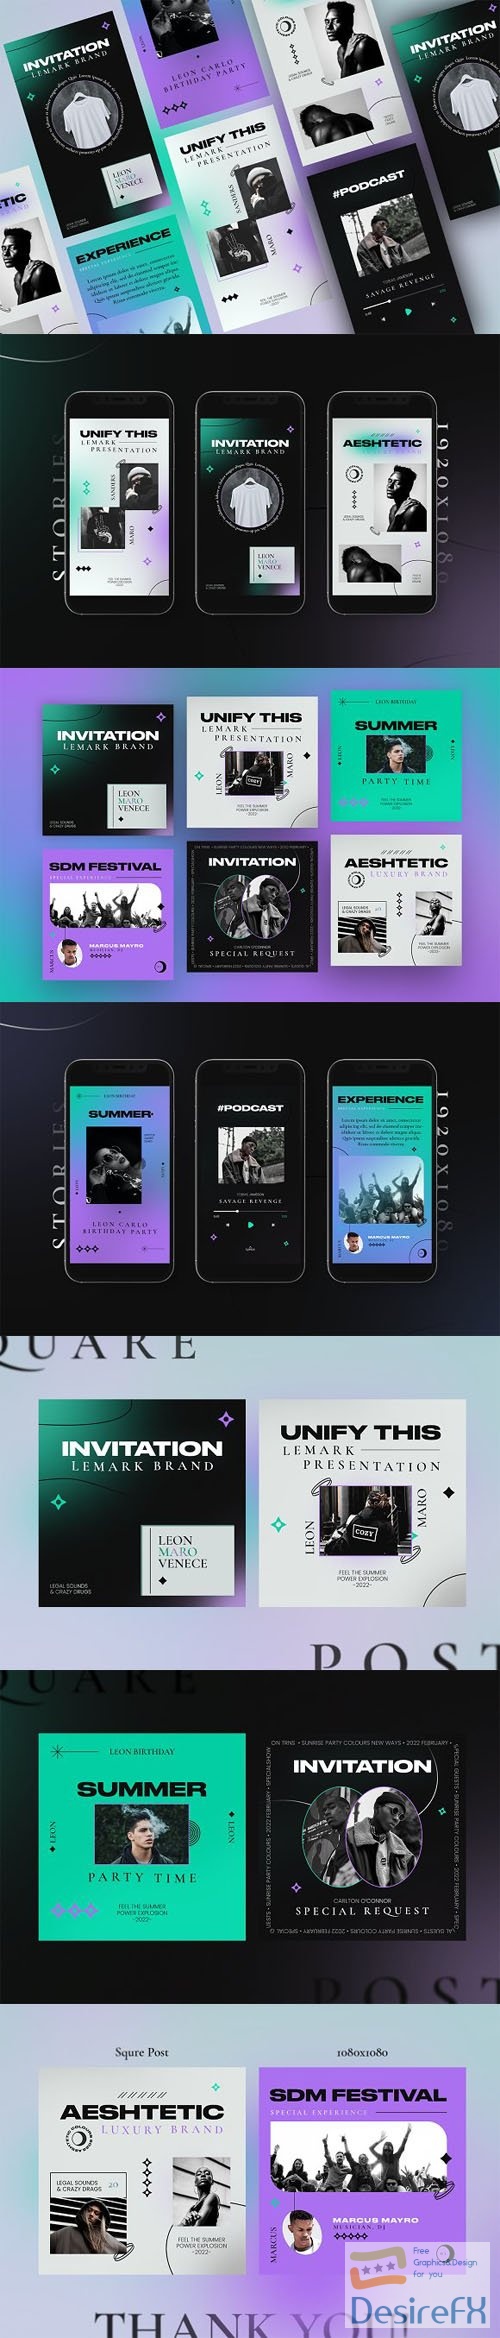 AESTHETIC Insta Posts &amp; Stories - PSD Templates